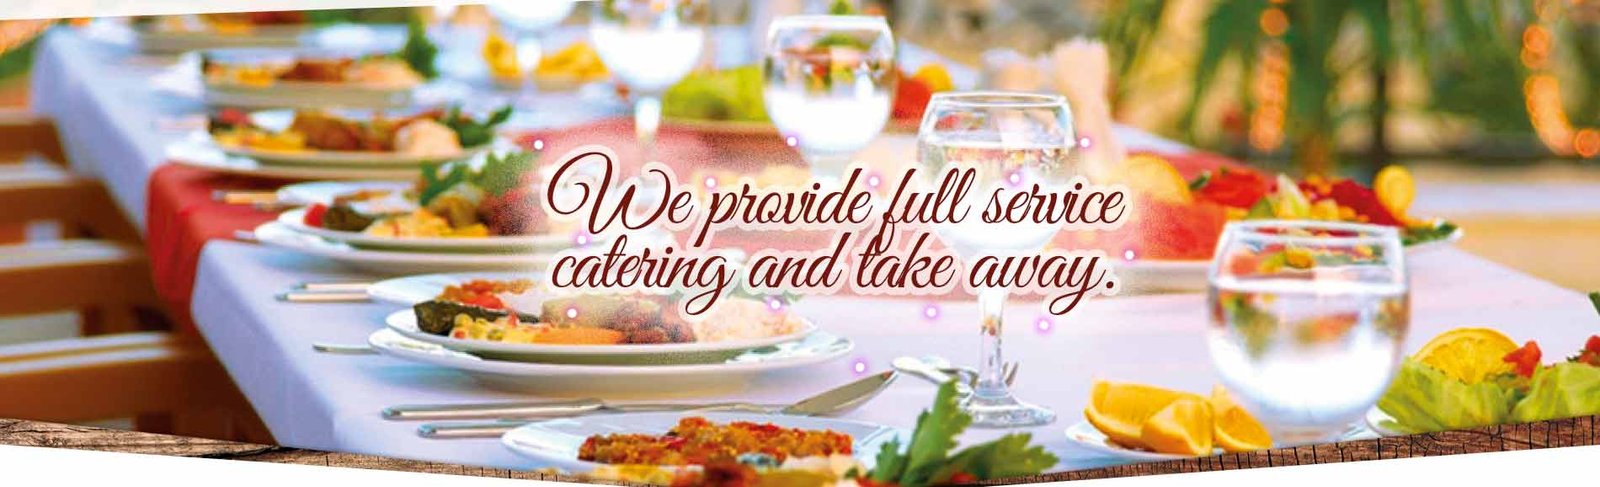 Catering wedding in Gage County